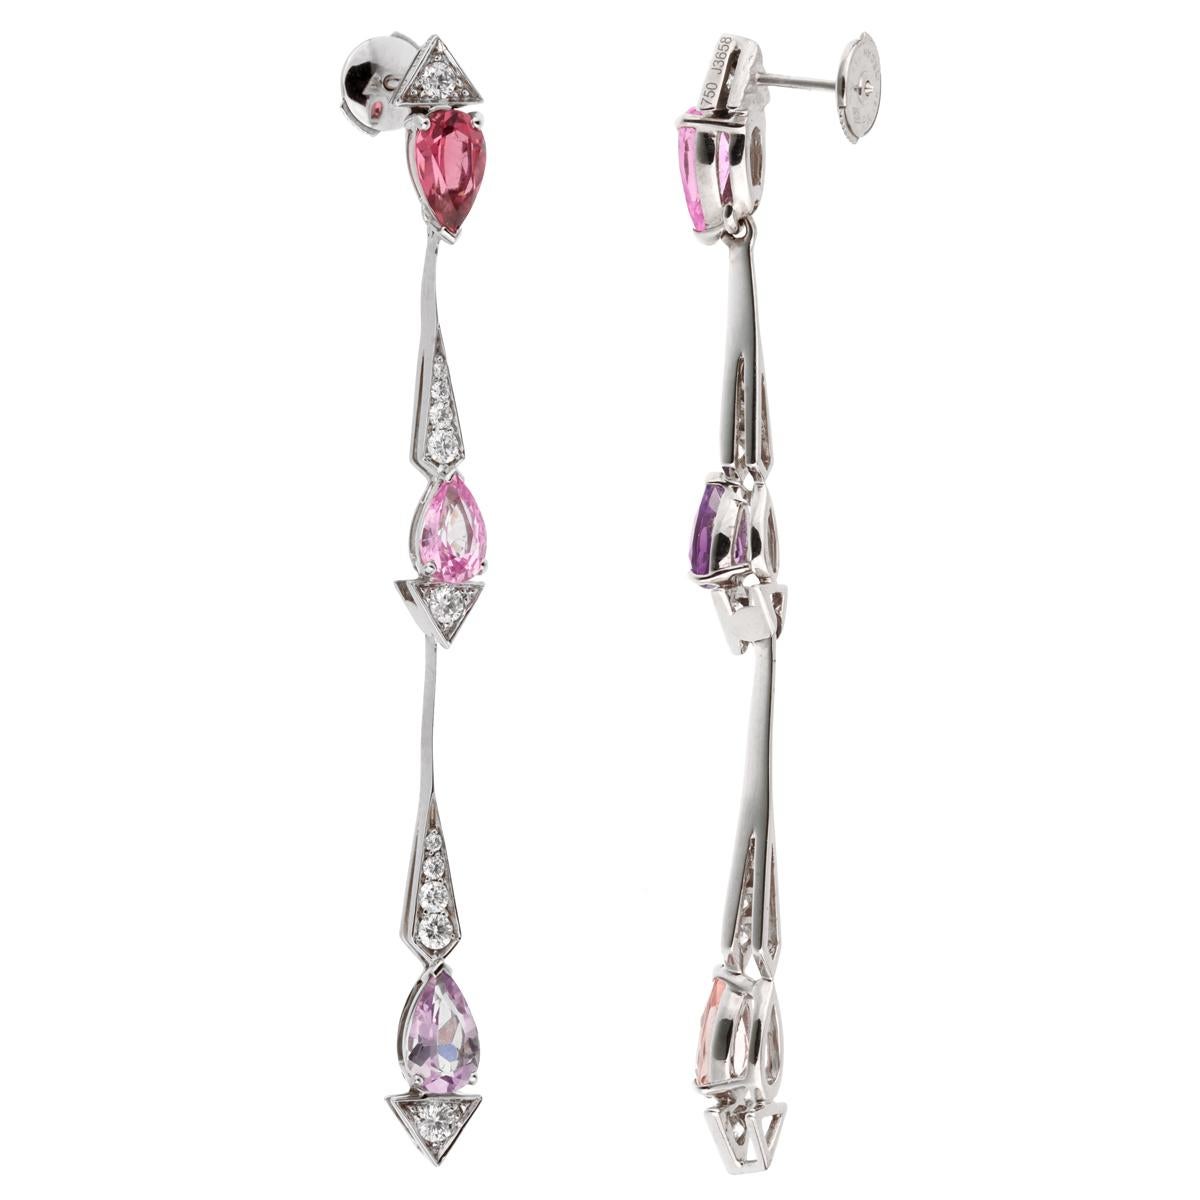 A chic set of Christian Dior diamond earrings showcasing Pink Sapphires, Amethyst, and Tourmaline set in 18k white gold. The earrings measures 2.75